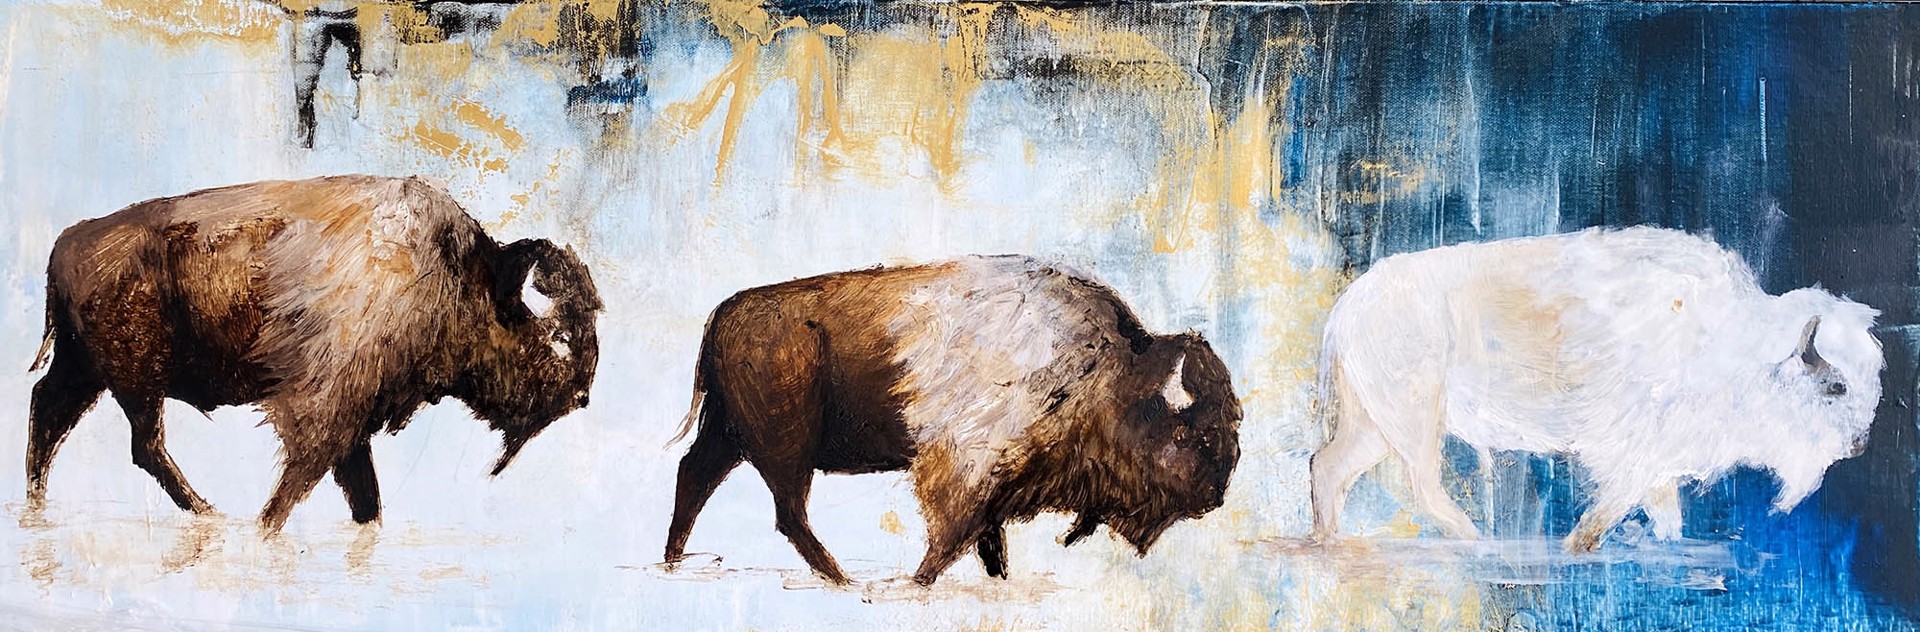 Original Oil Painting By Jenna Von Benedikt Featuring Three Walking Bison Two Brown And One White Across Abstracted Landscape